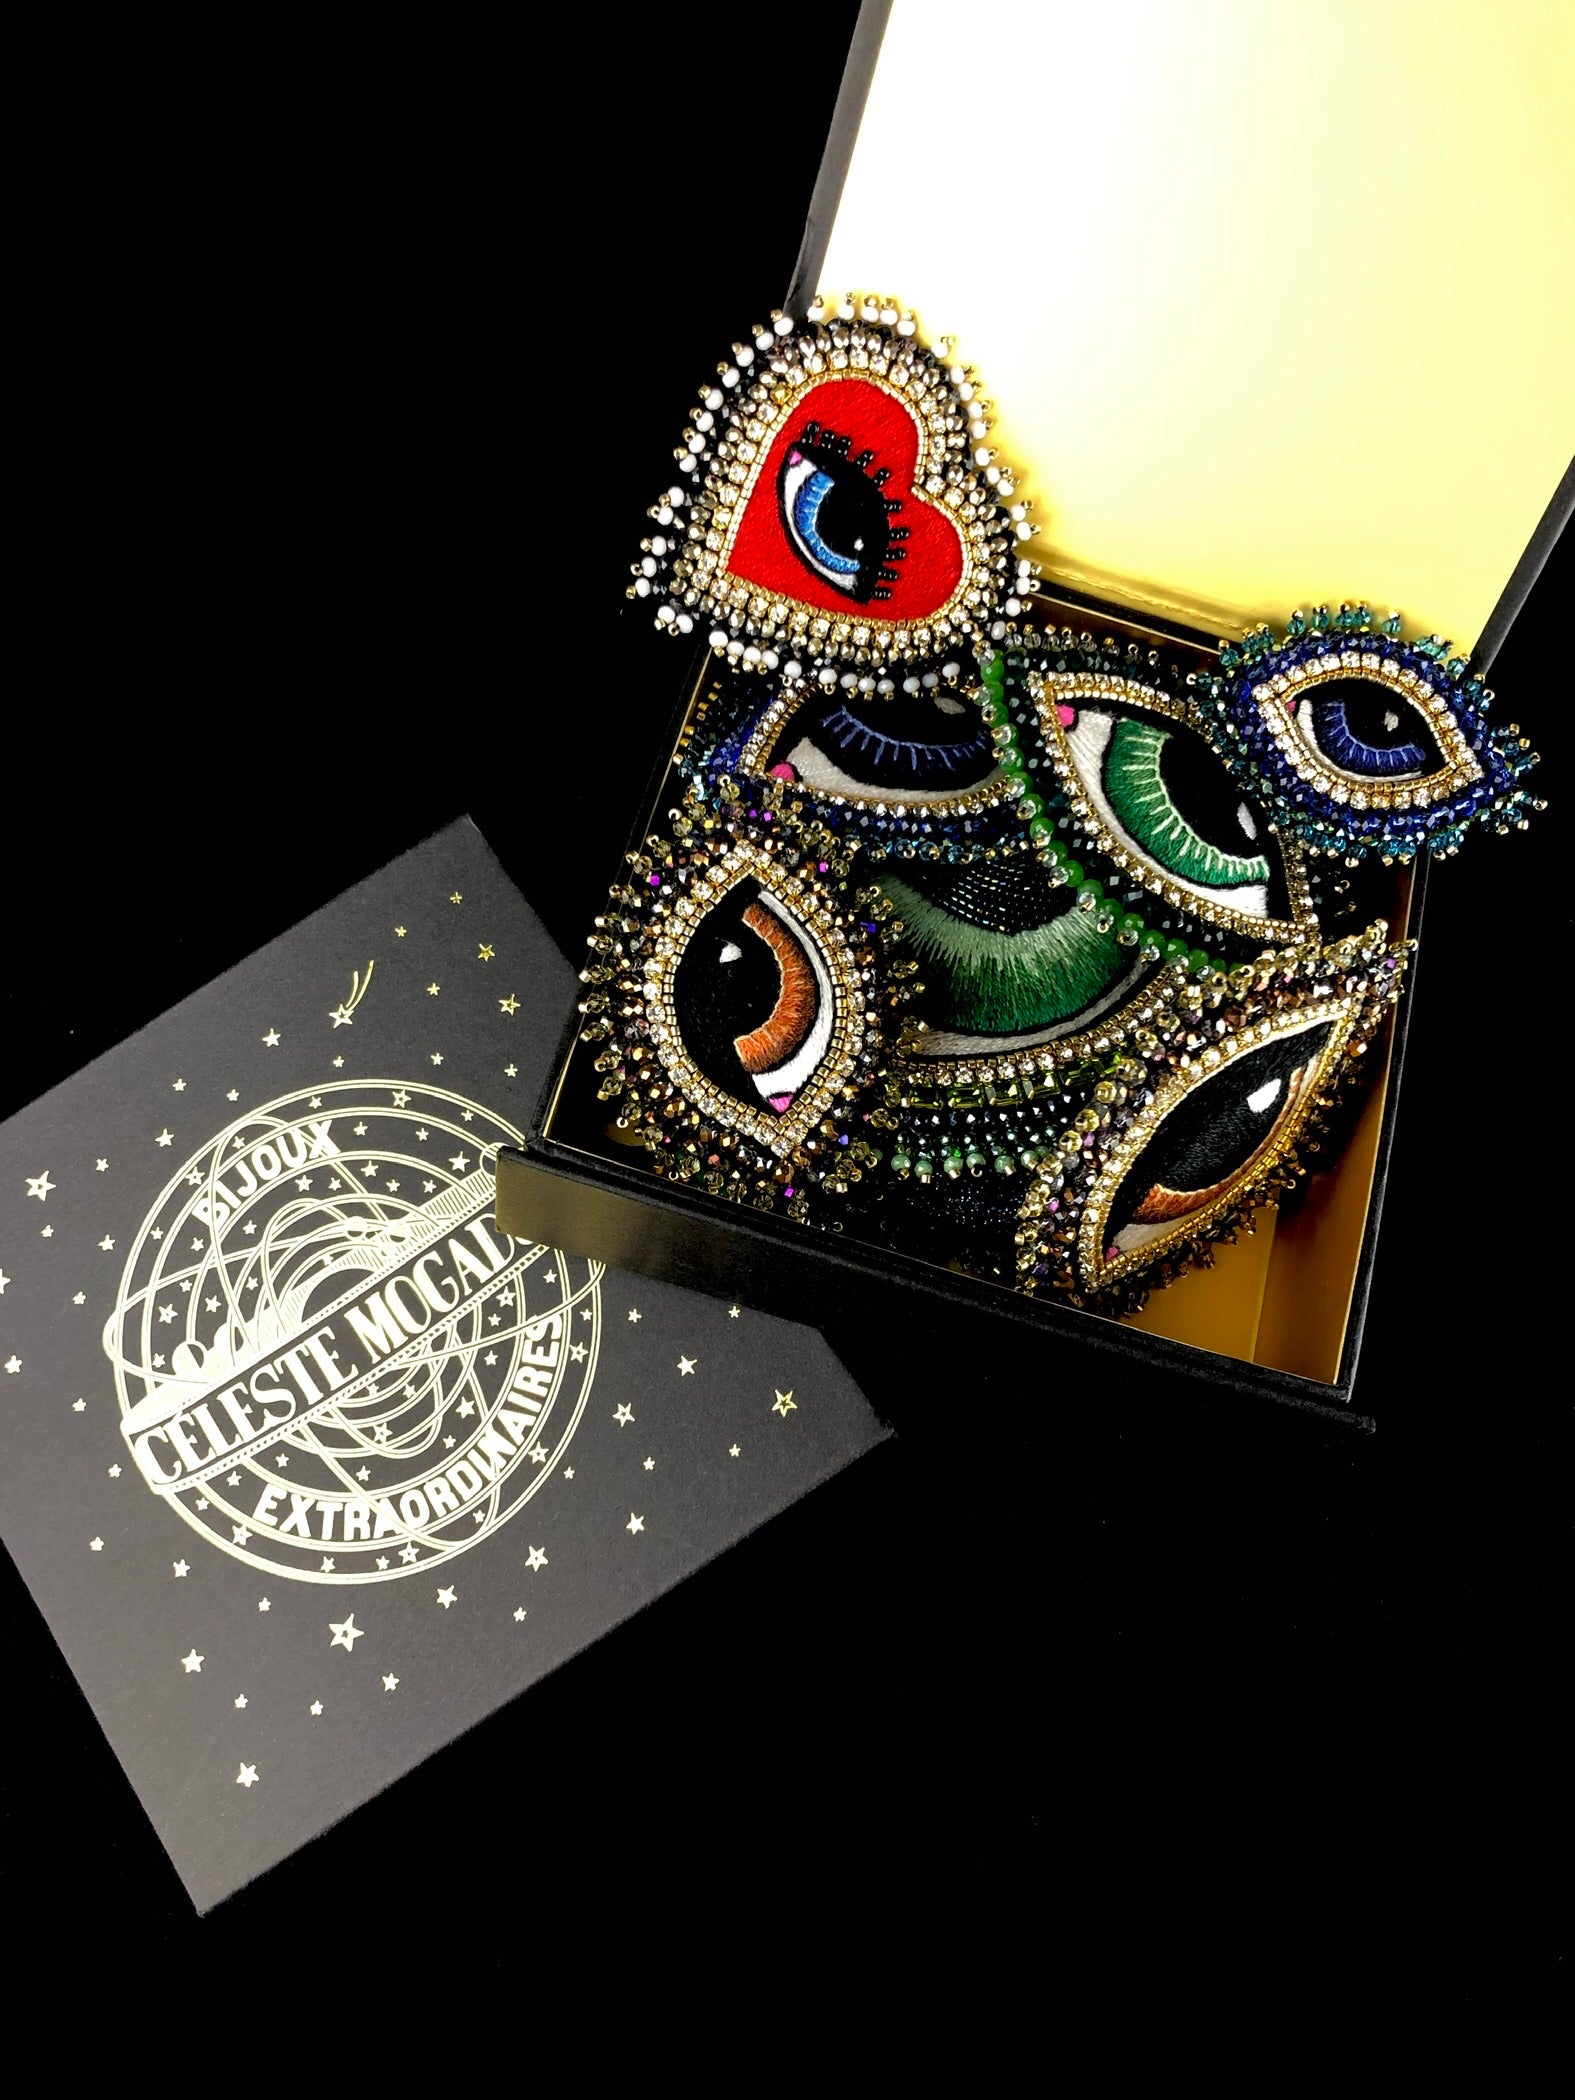 Collection of Celeste Mogador brooches shown in designer's packaging